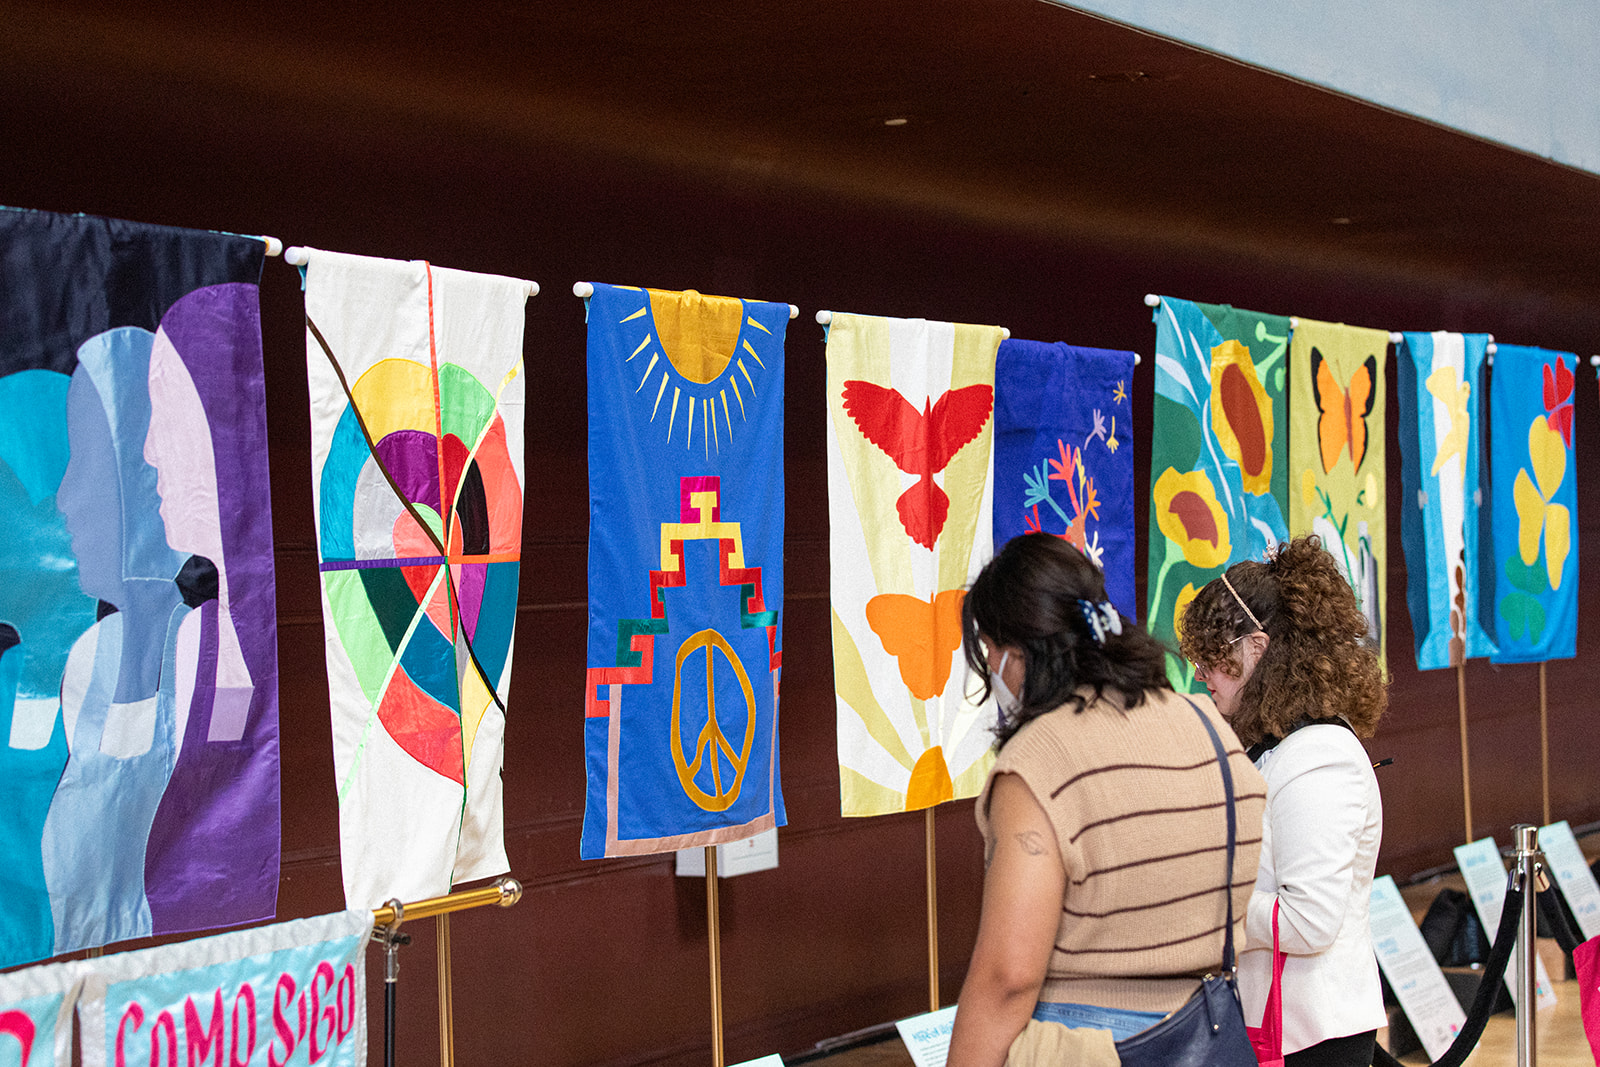 Two people gaze at colorful textile banners